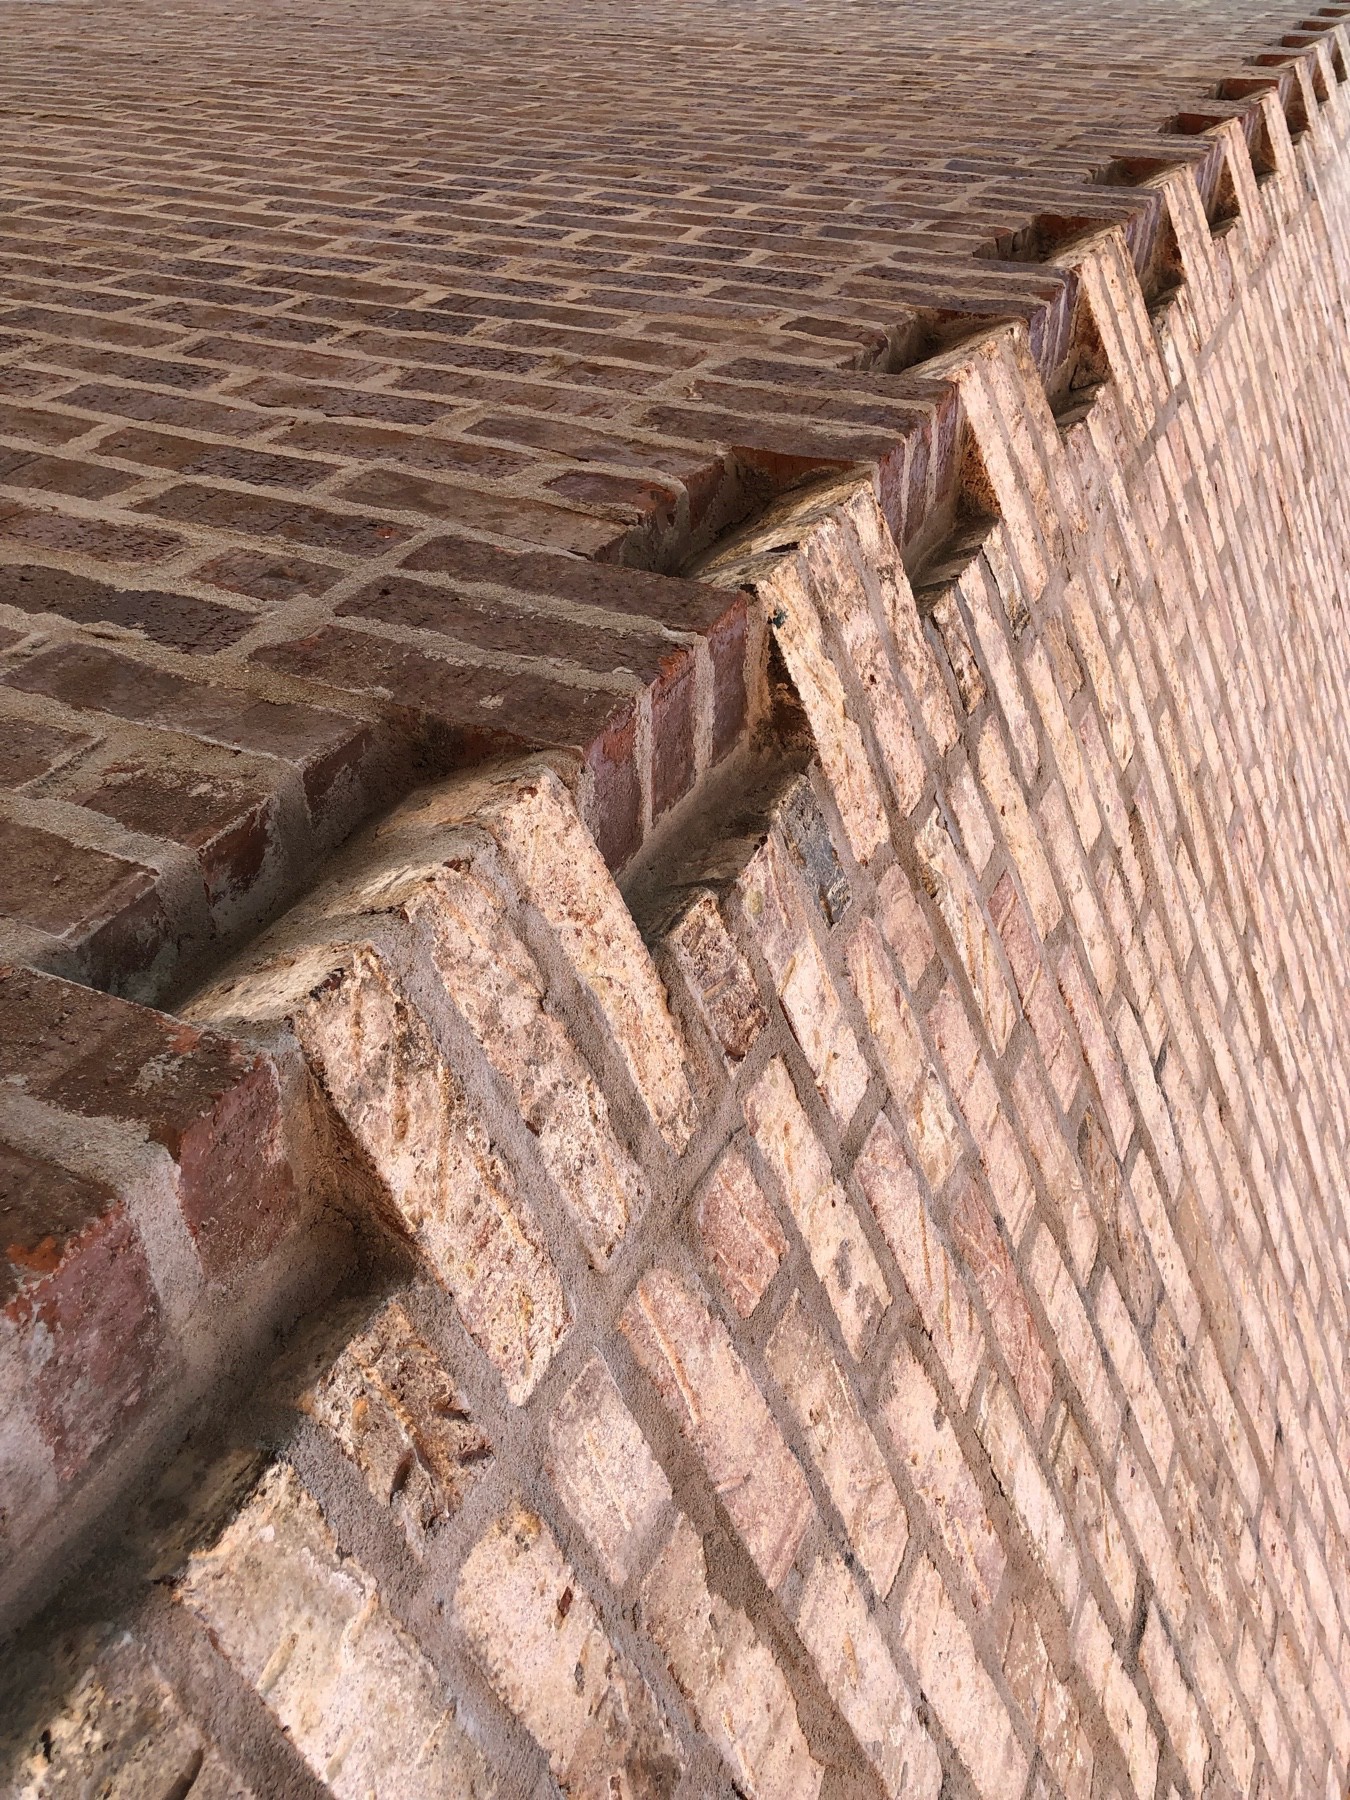 Two brick walls joined together in a teeth-like manner.  The joint is angled from bottom left to top right, and the wall on the right is a lighter shade of red than the left.